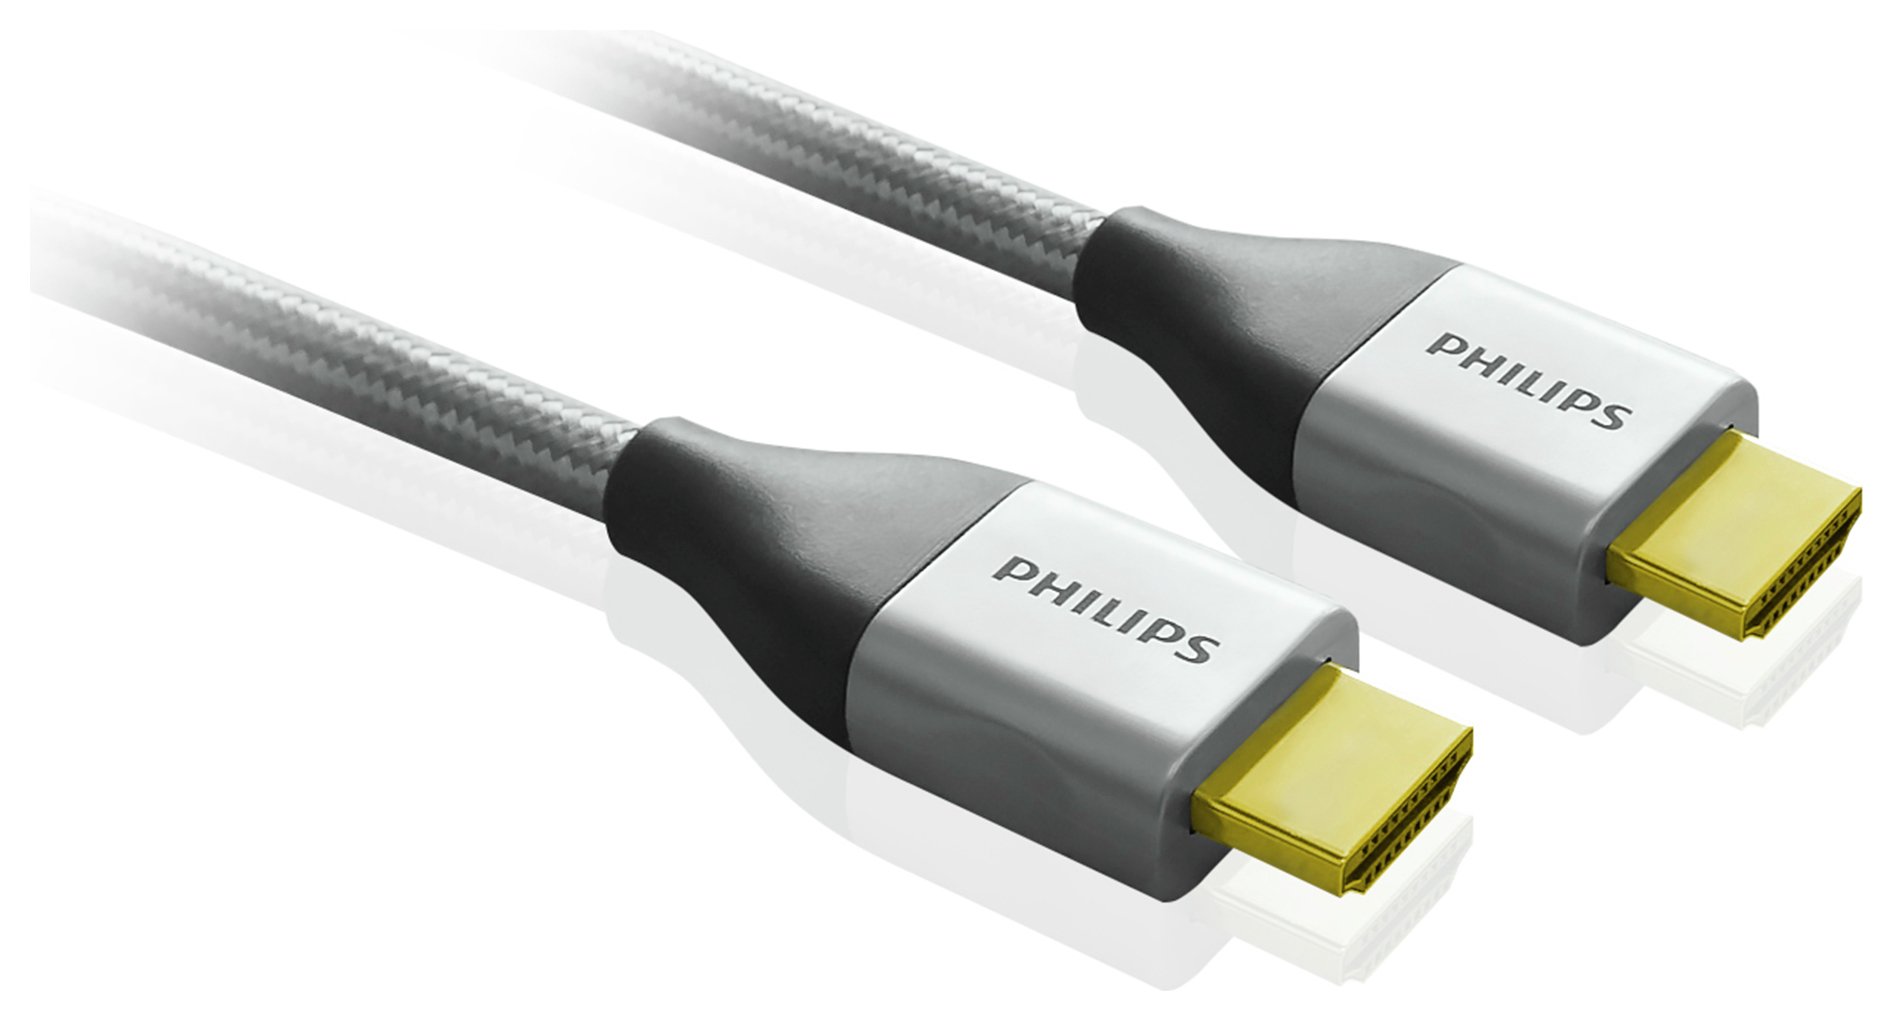 Philips - 4K HDMI Cable Review